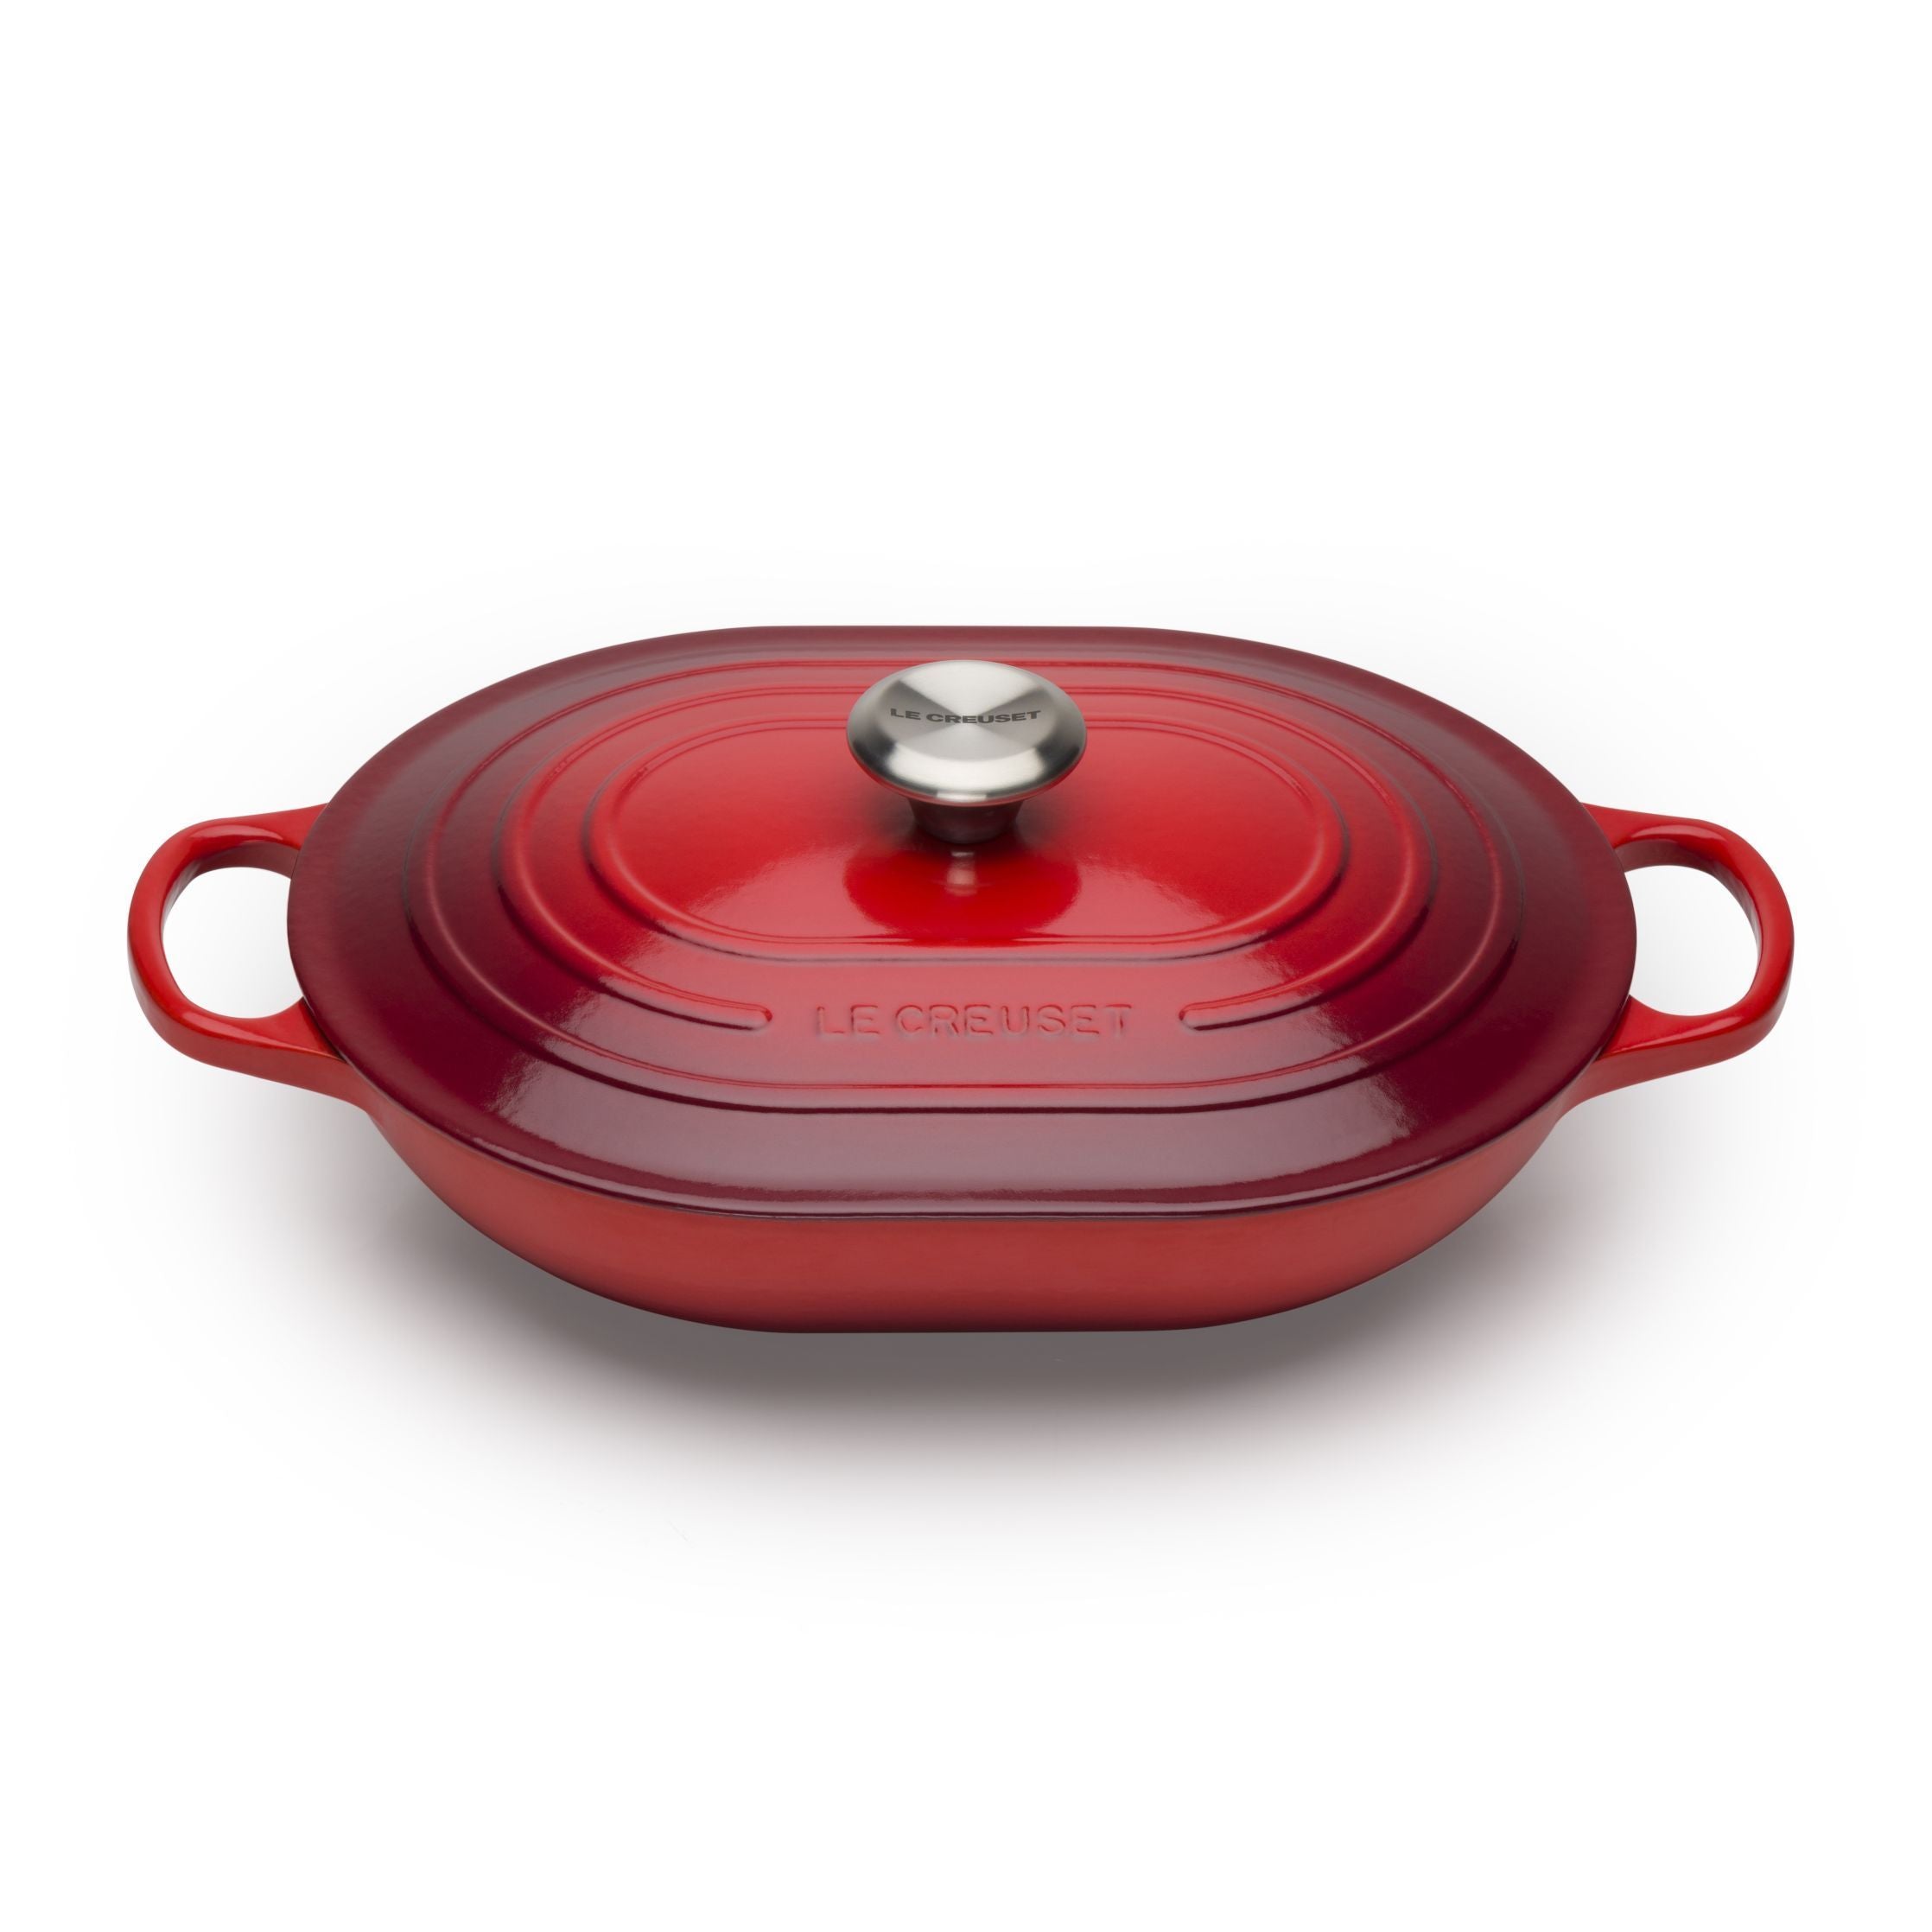 Le Creuset Nature Oblungo Roaster 3,4 L, Cherry Red